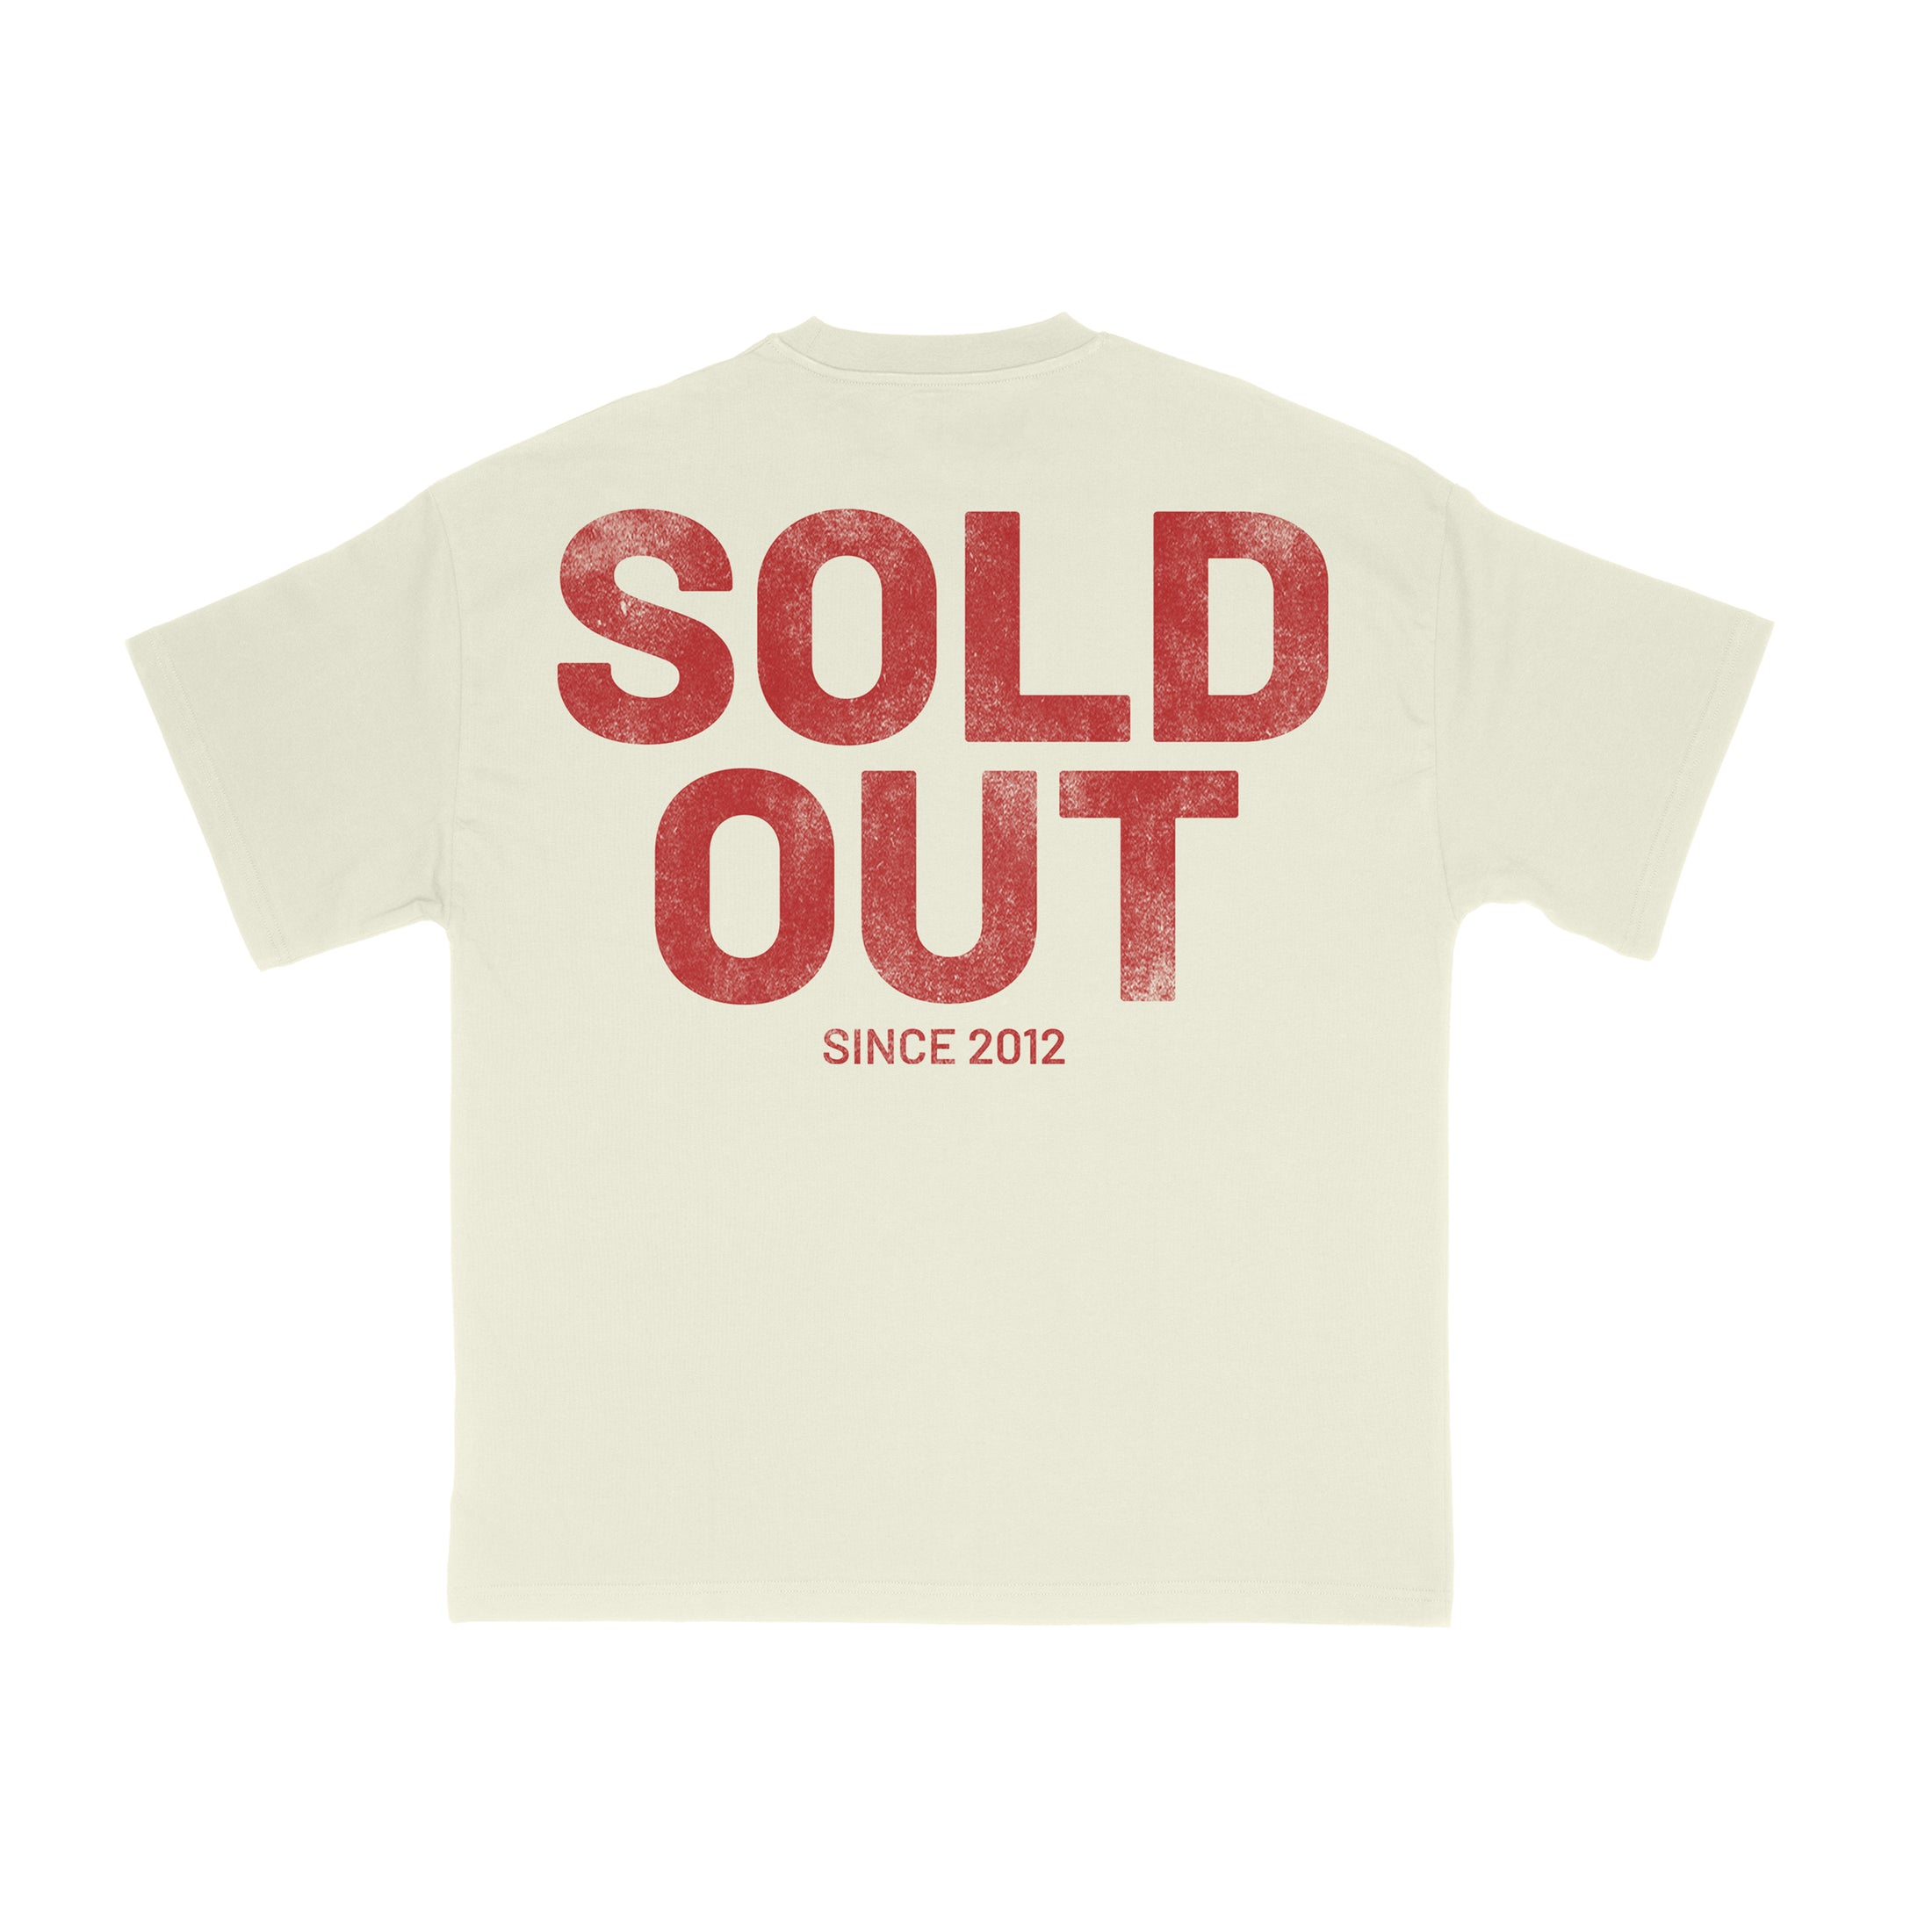 SOLD OUT (Cream/Red)